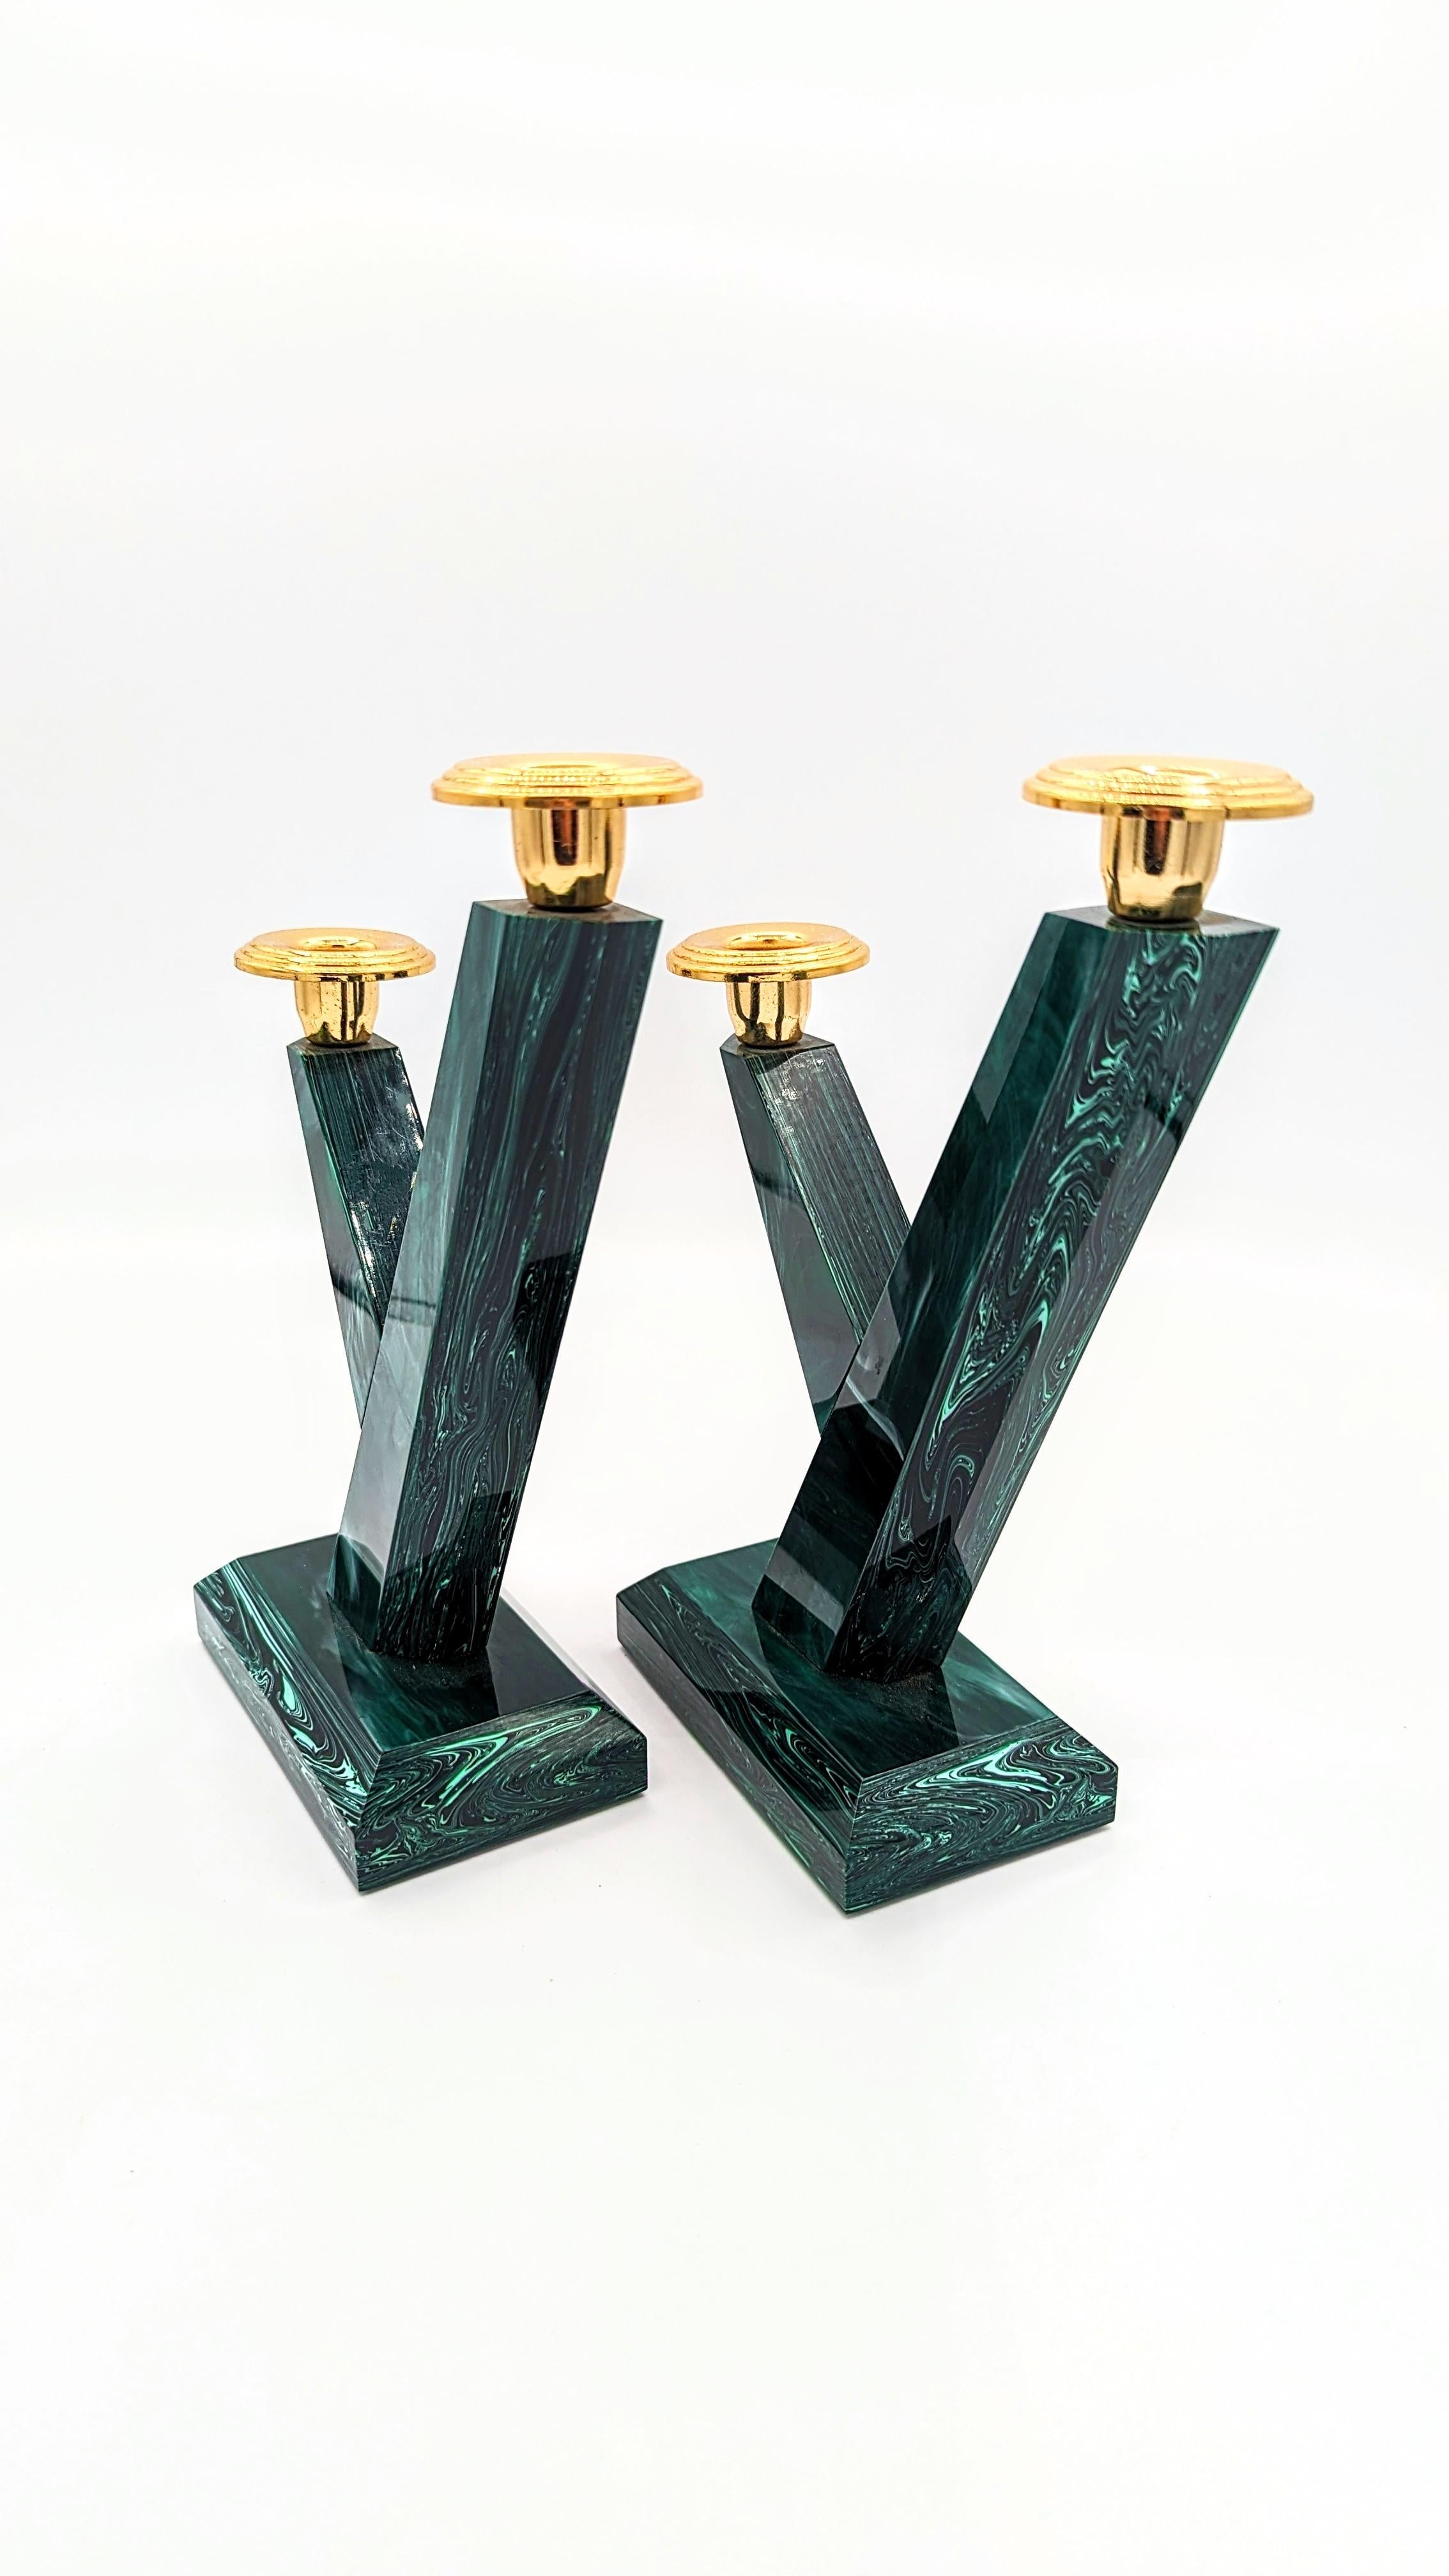 Pair of Bakelite Candlestick, France 1960s For Sale 7